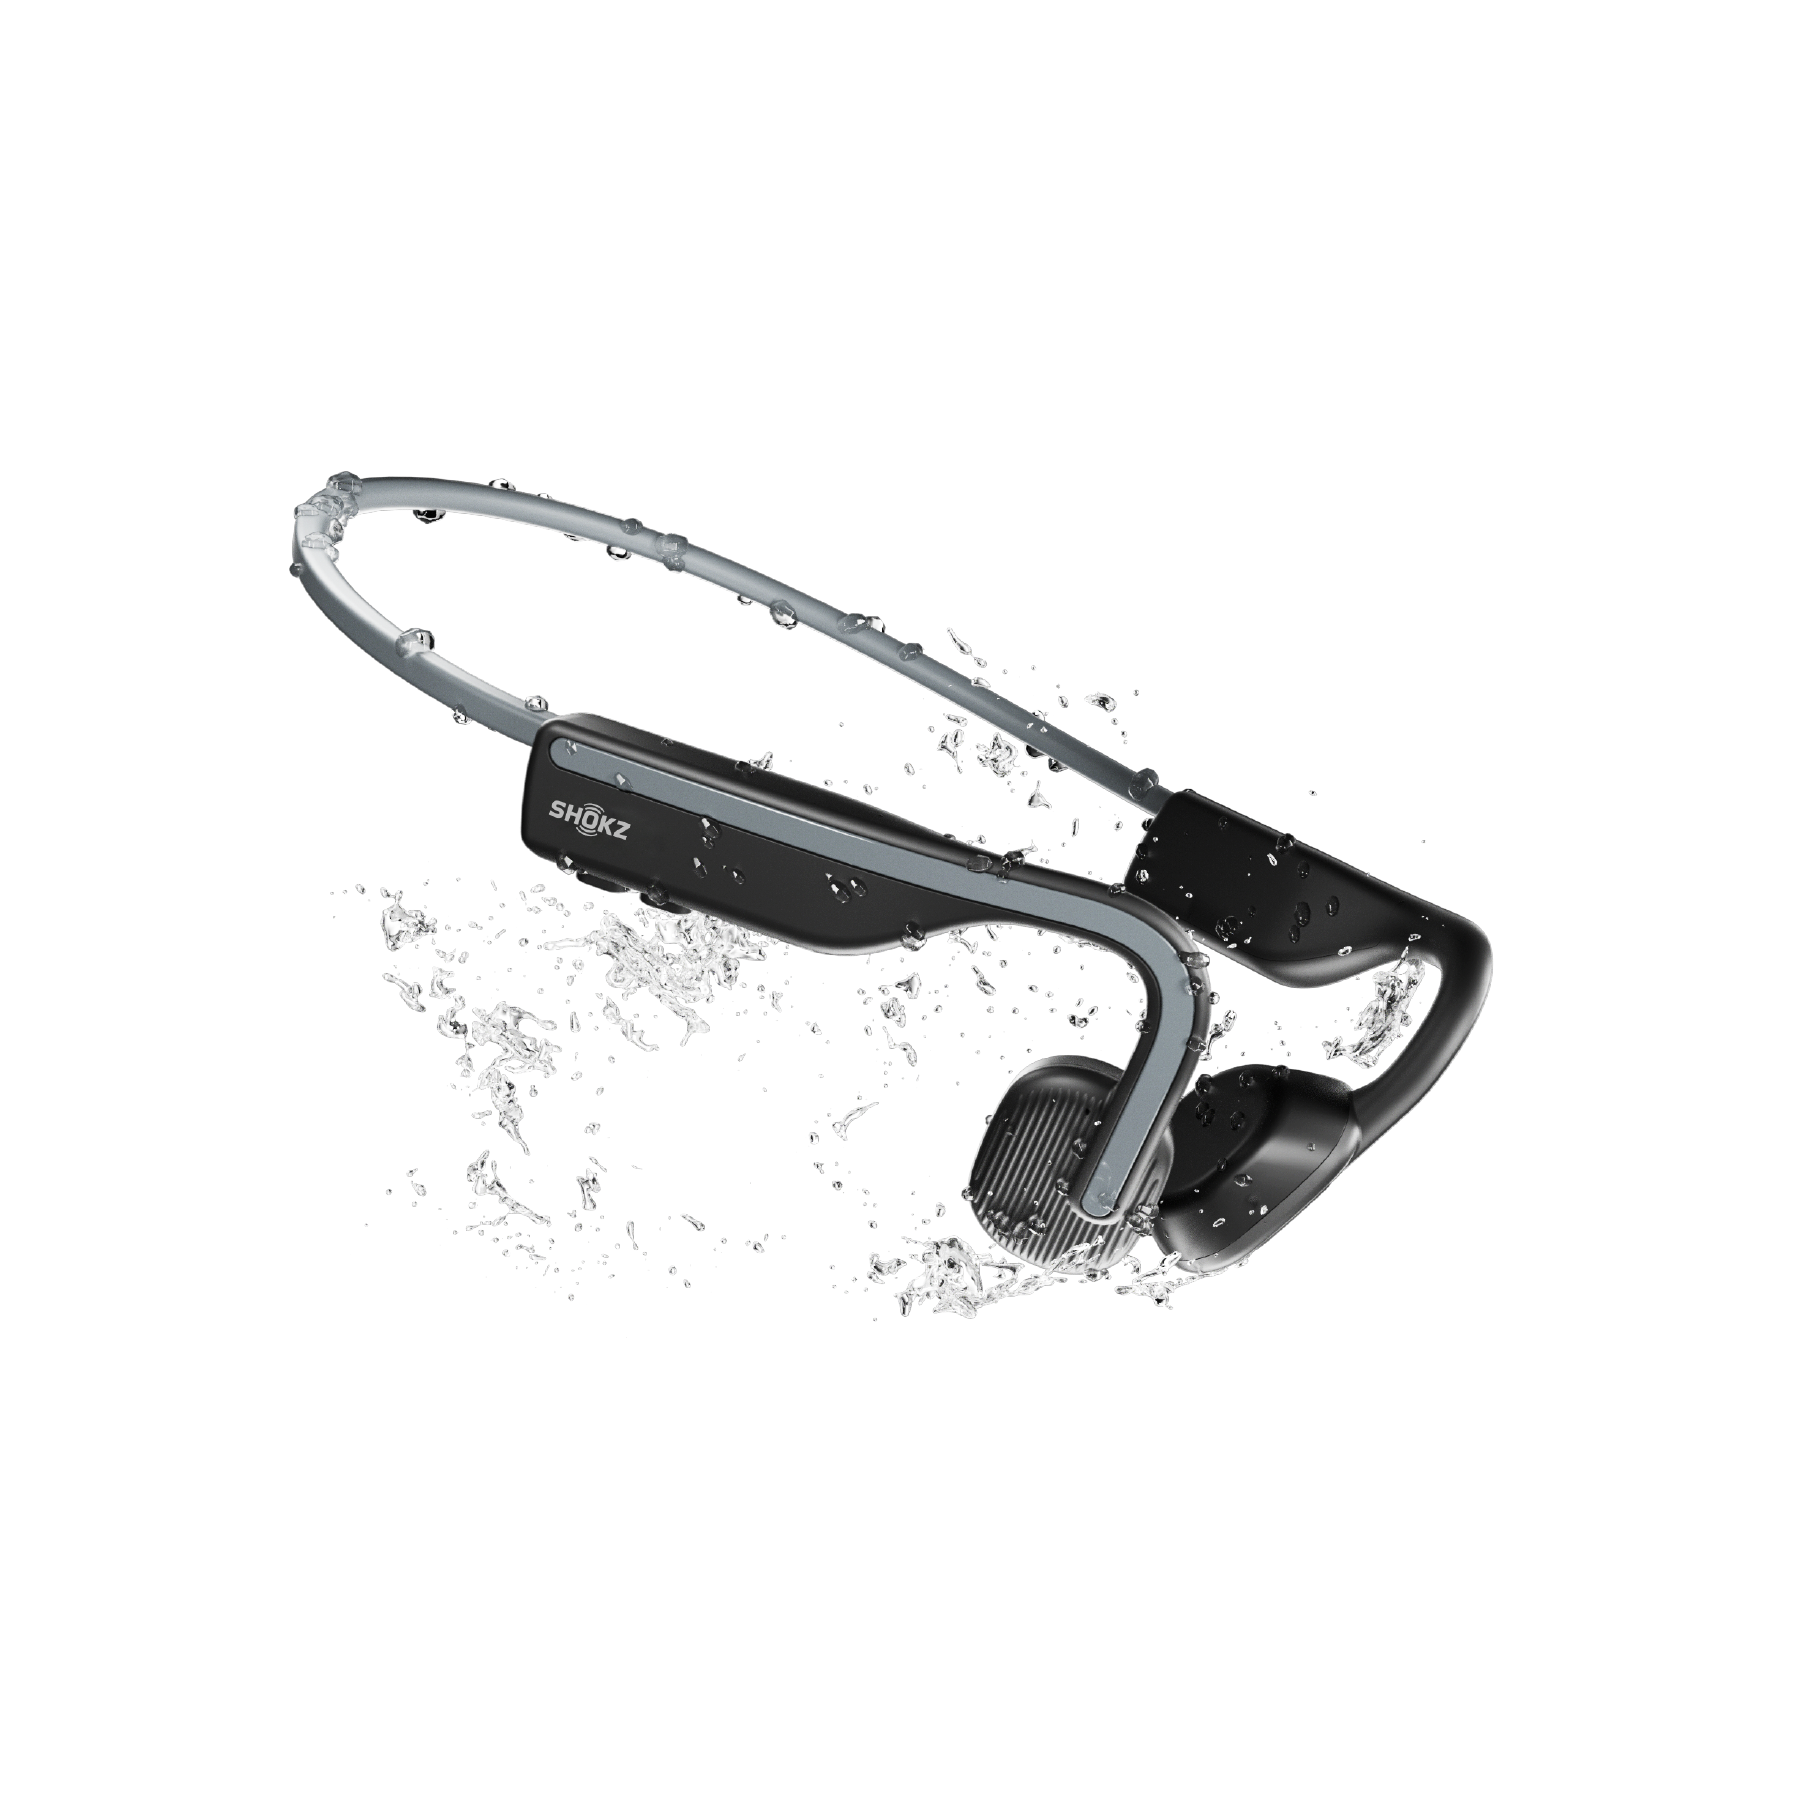 SHOKZ OpenMove Bone-Conduction Open-Ear Lifestyle Headphones with  Microphones in White S661-ST-WT-US - The Home Depot